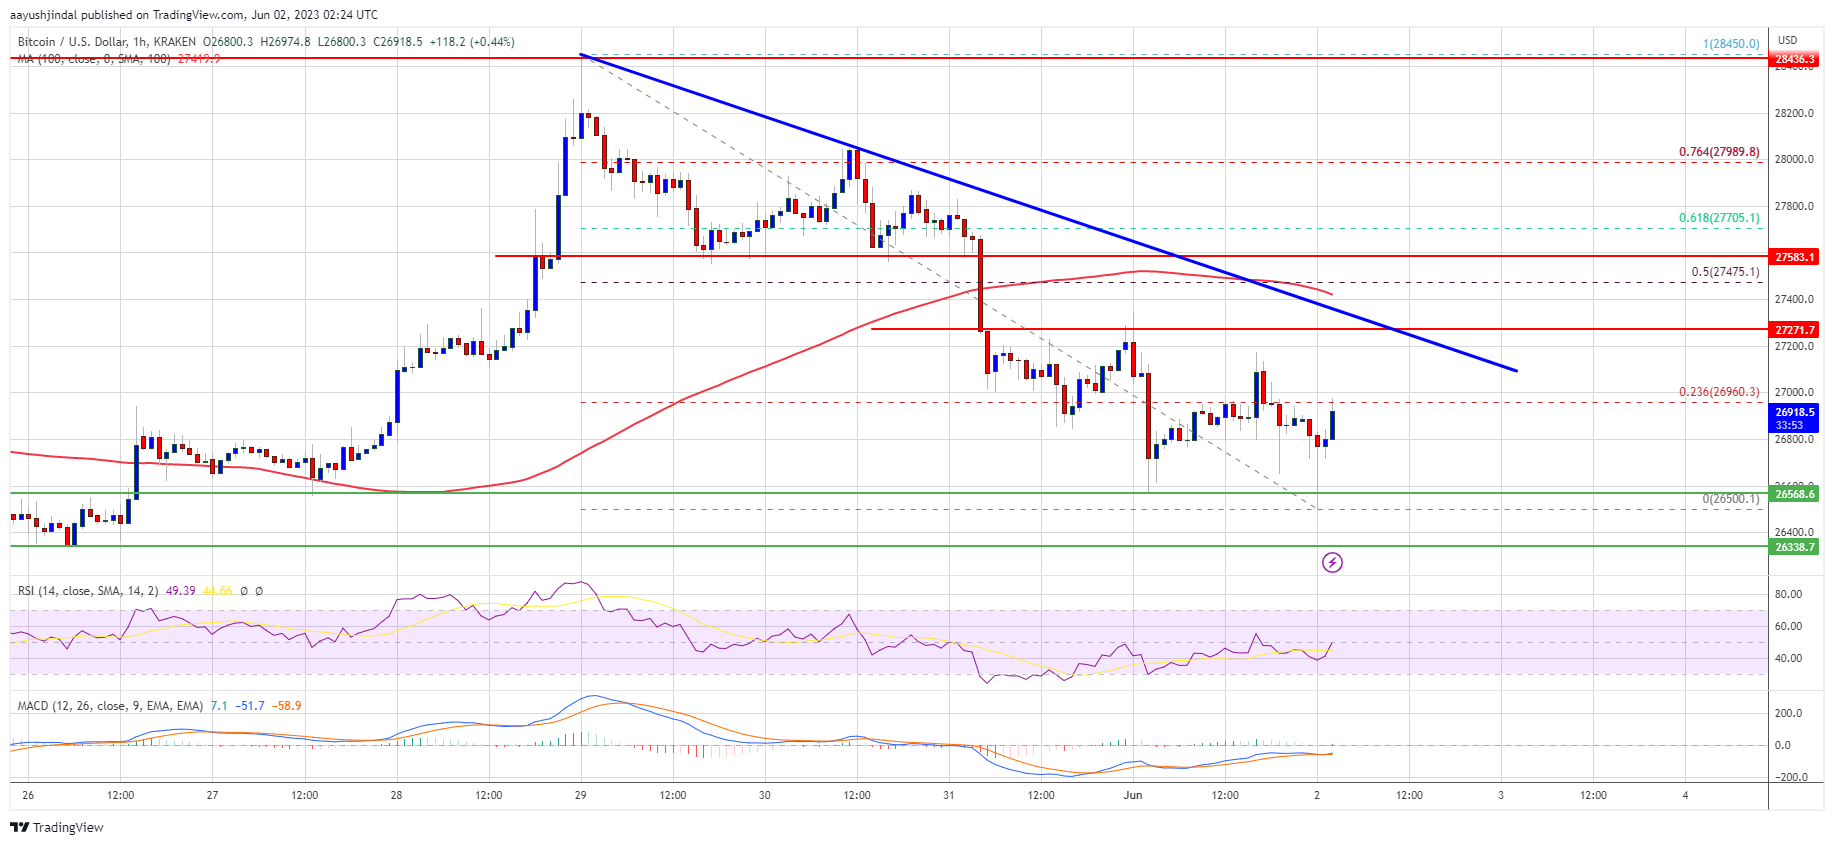 Bitcoin Price Faces Confluence of Bearish Factors And Could Decline Heavily